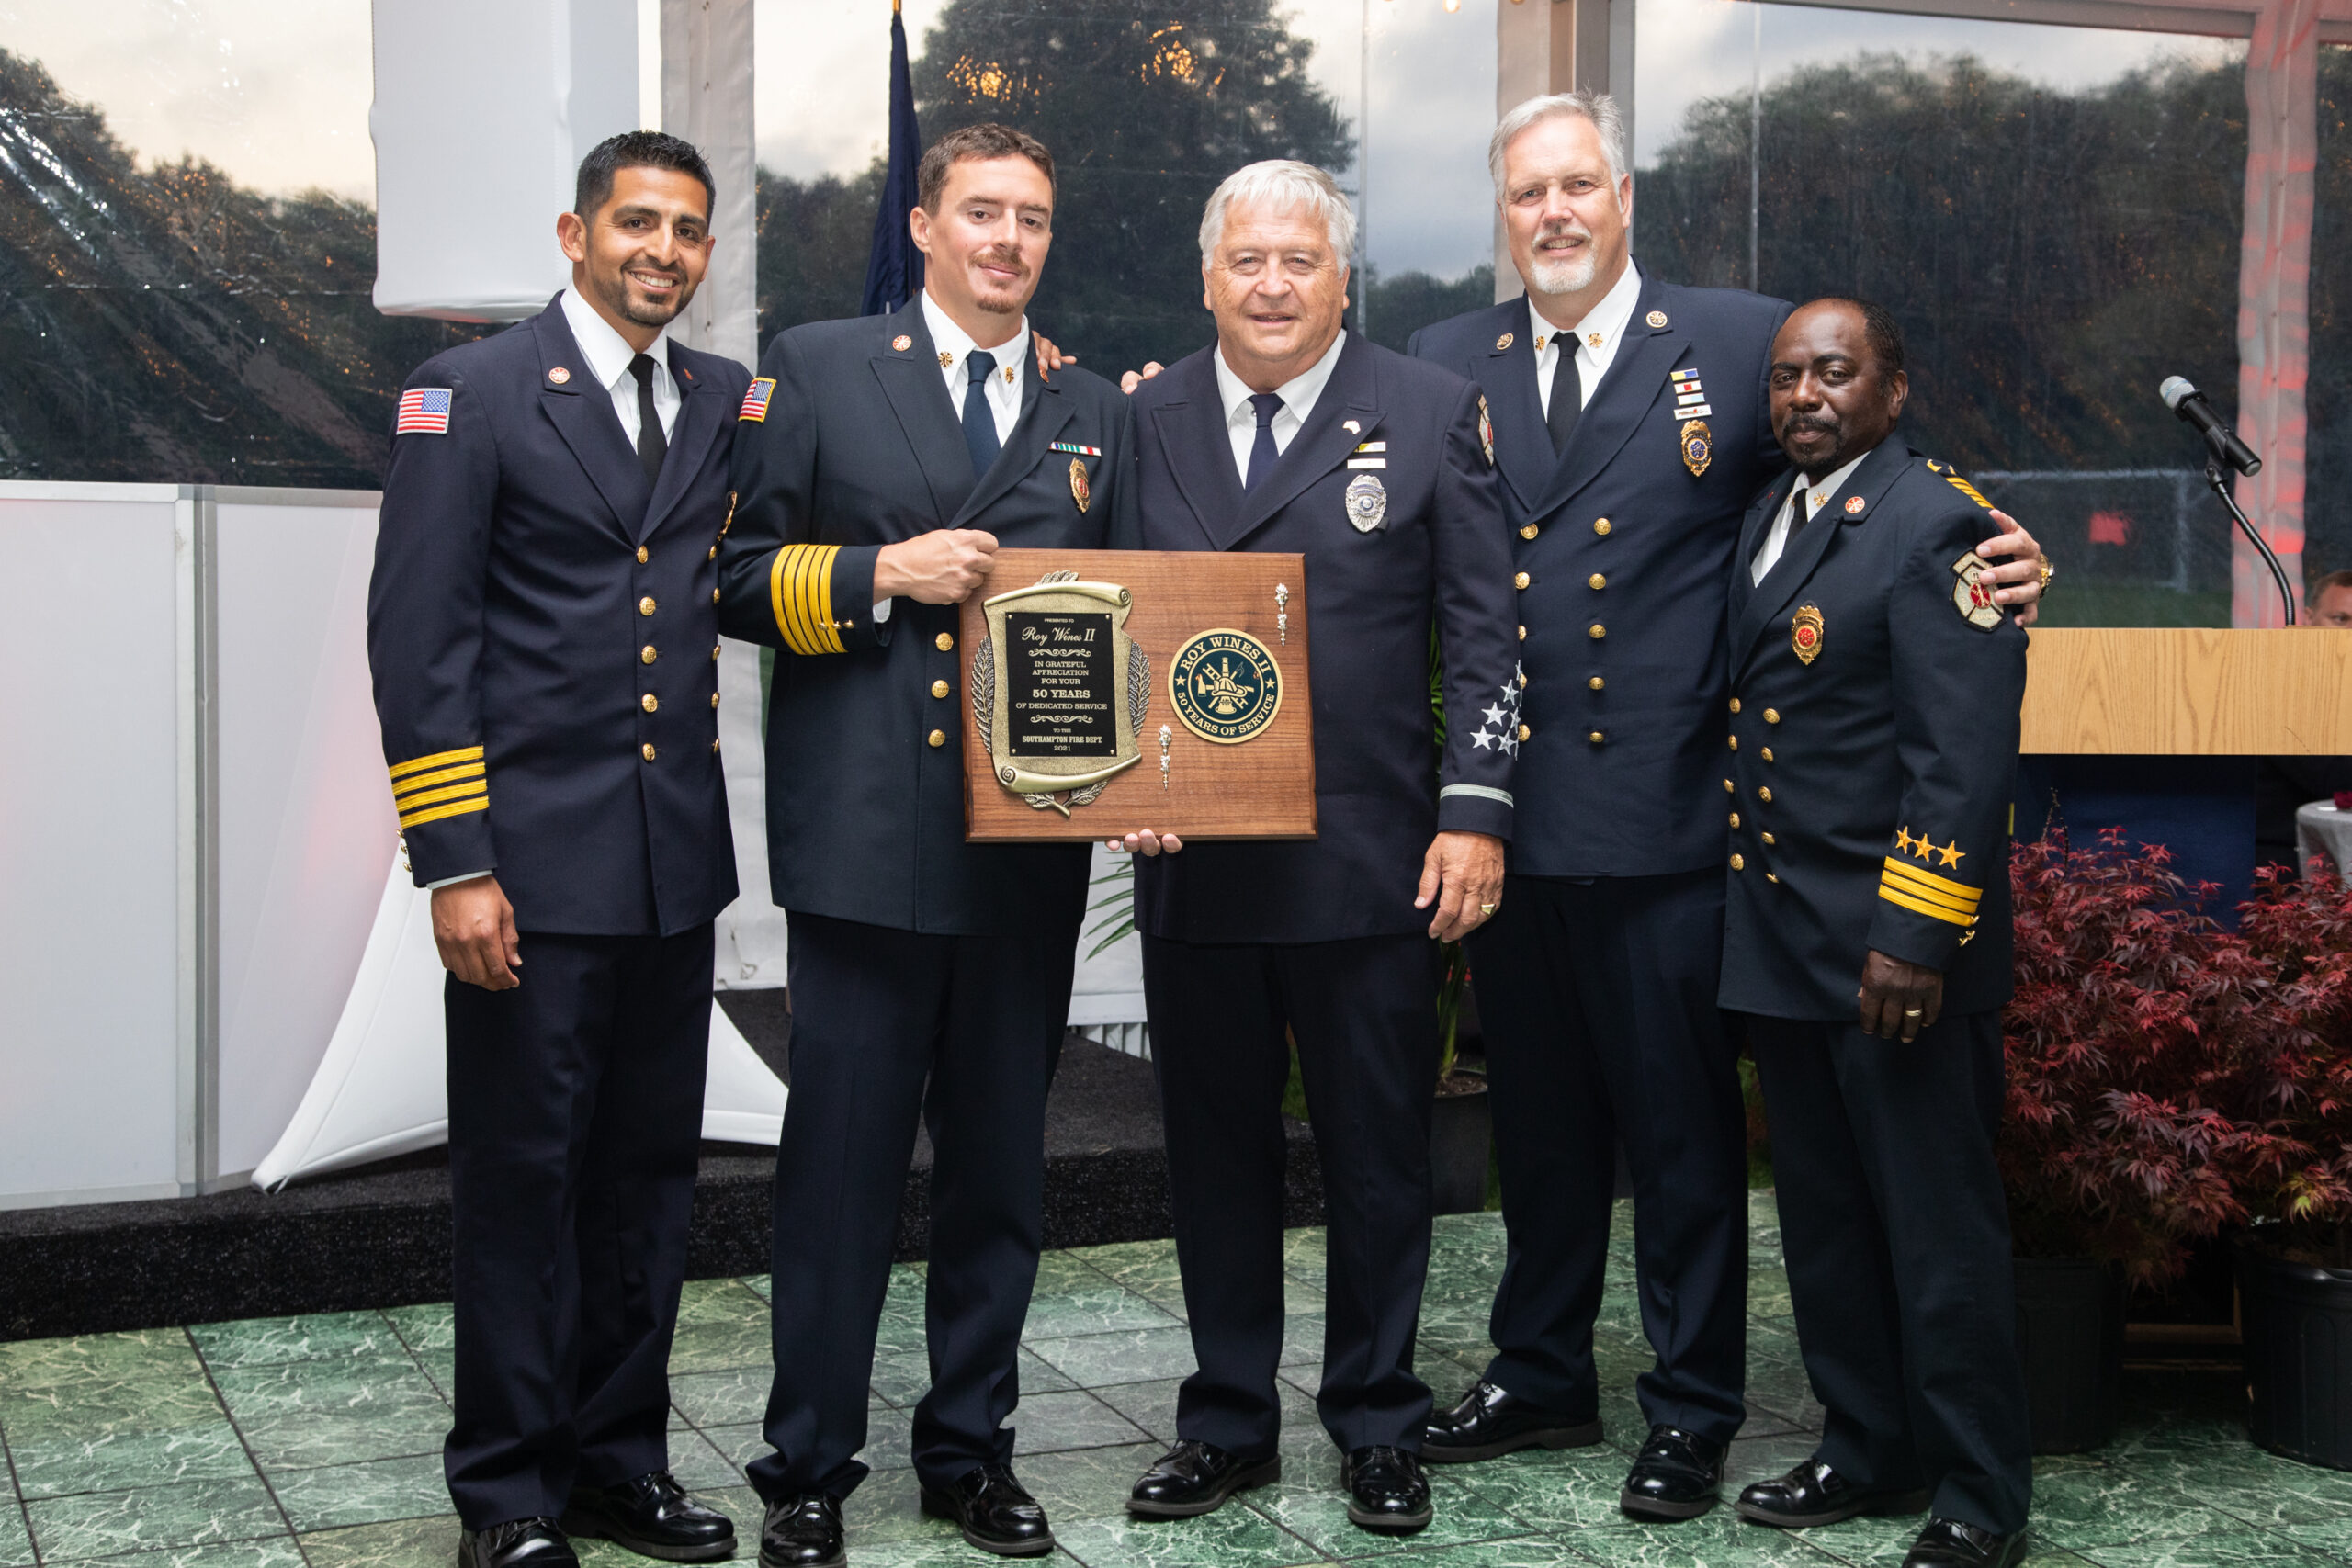 Southampton Fire Department honored two longtime members for 50 years of service -- William Culver and Roy Wines III -- at its annual dinner in June. From left, First Assistant Chief Manny Escobar, Chief Alfred Callahan, Roy Wines III, 